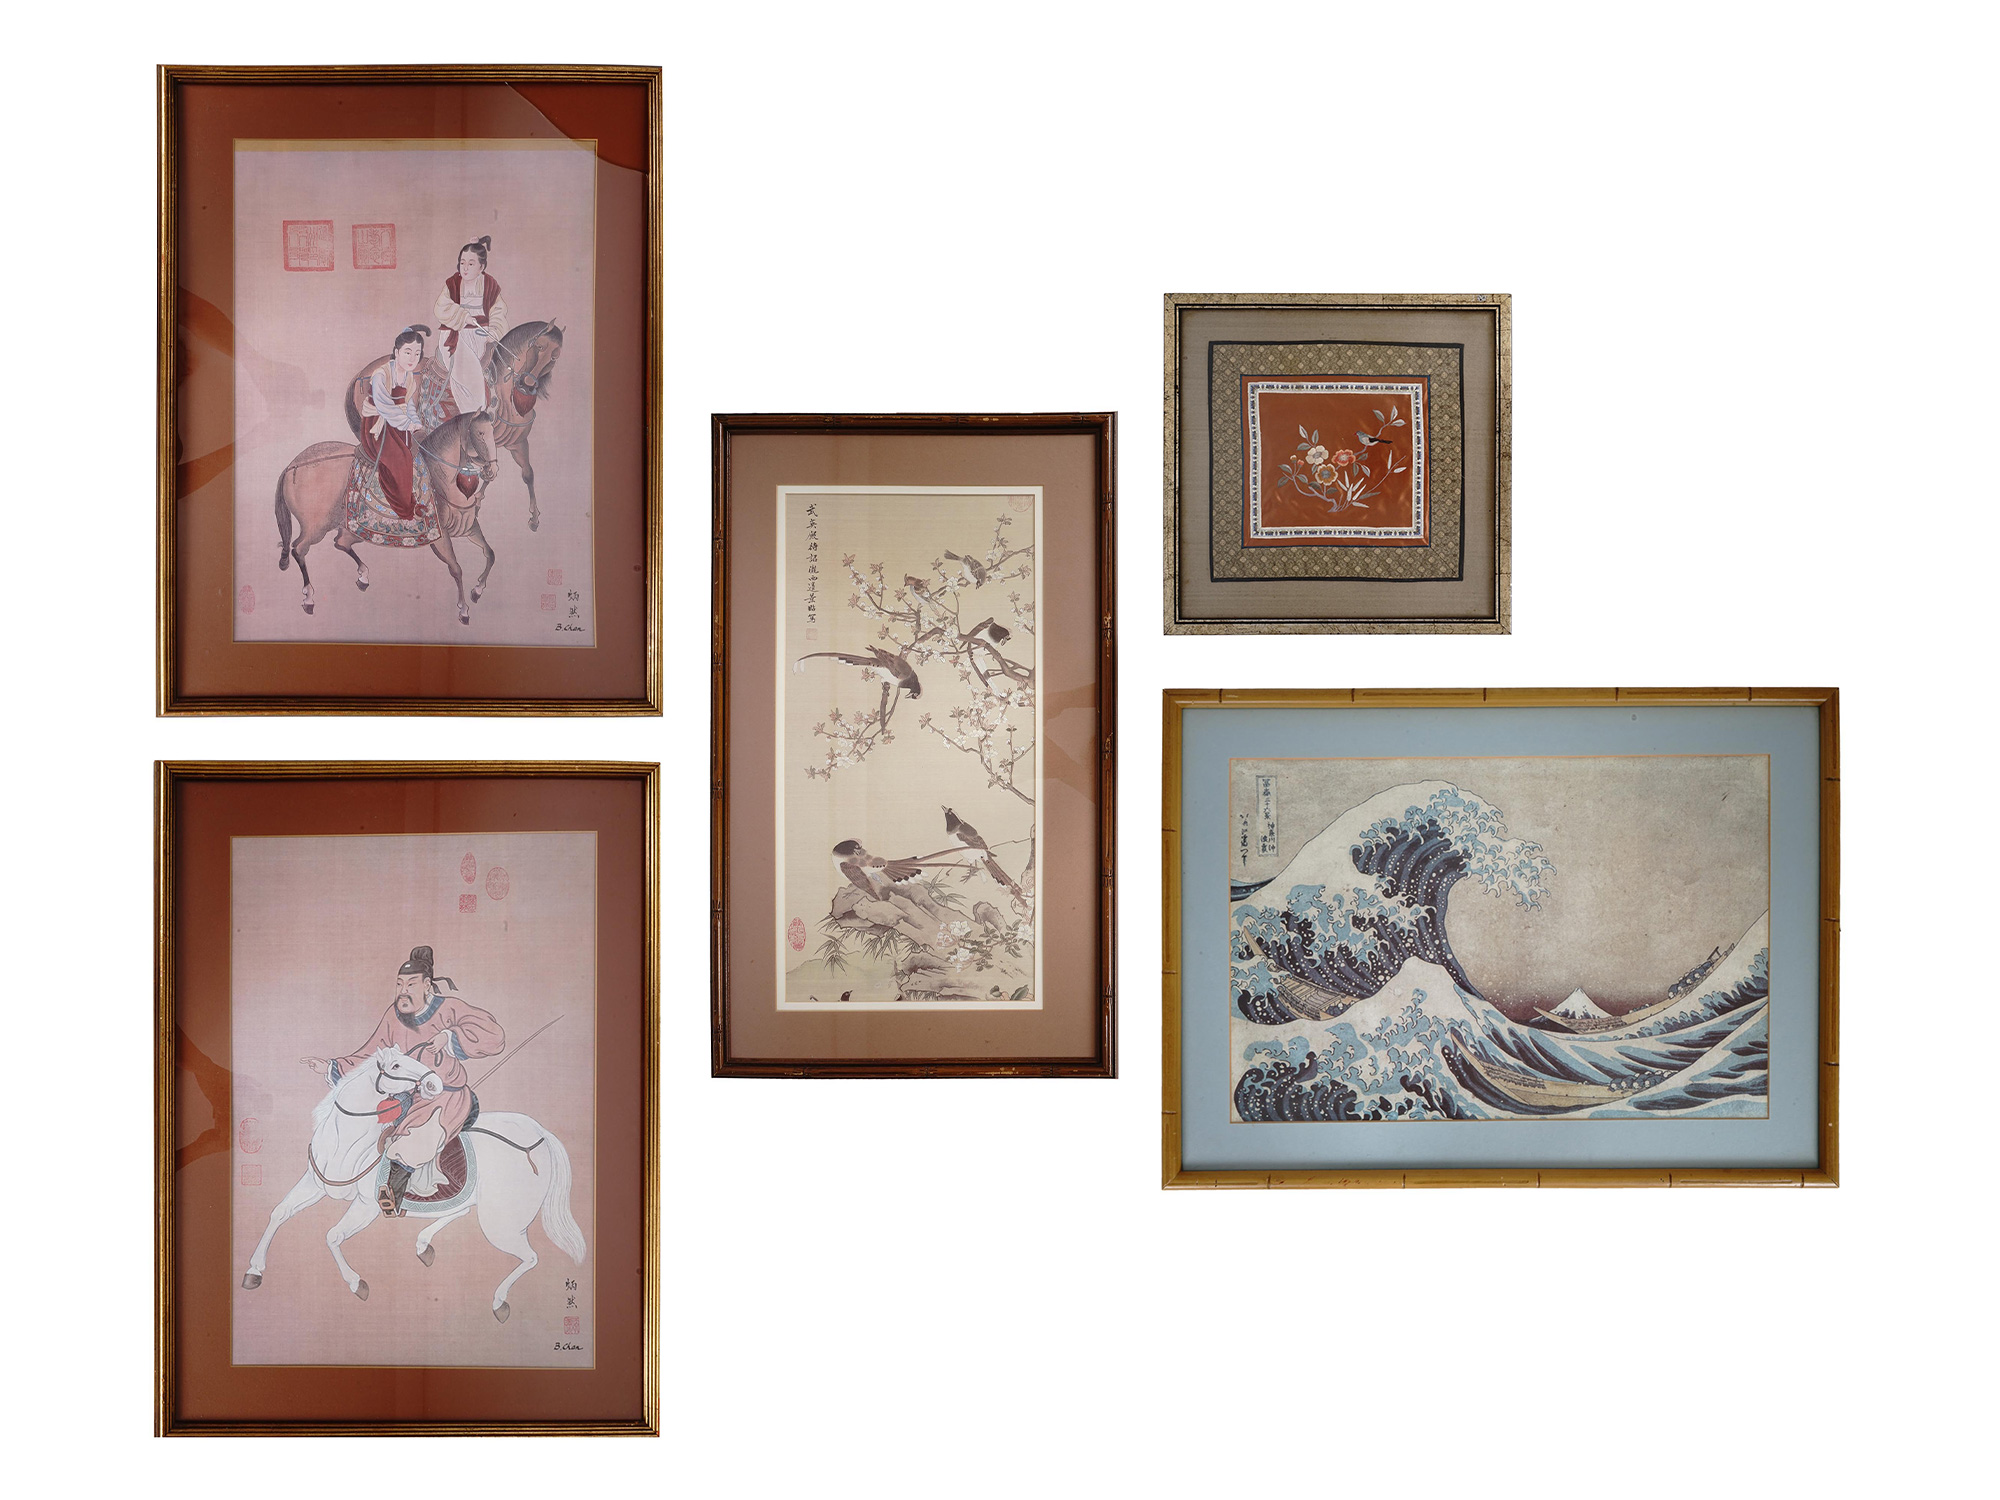 FRAMED ORIENTAL WALL ART PRINTS AND EMBROIDERY